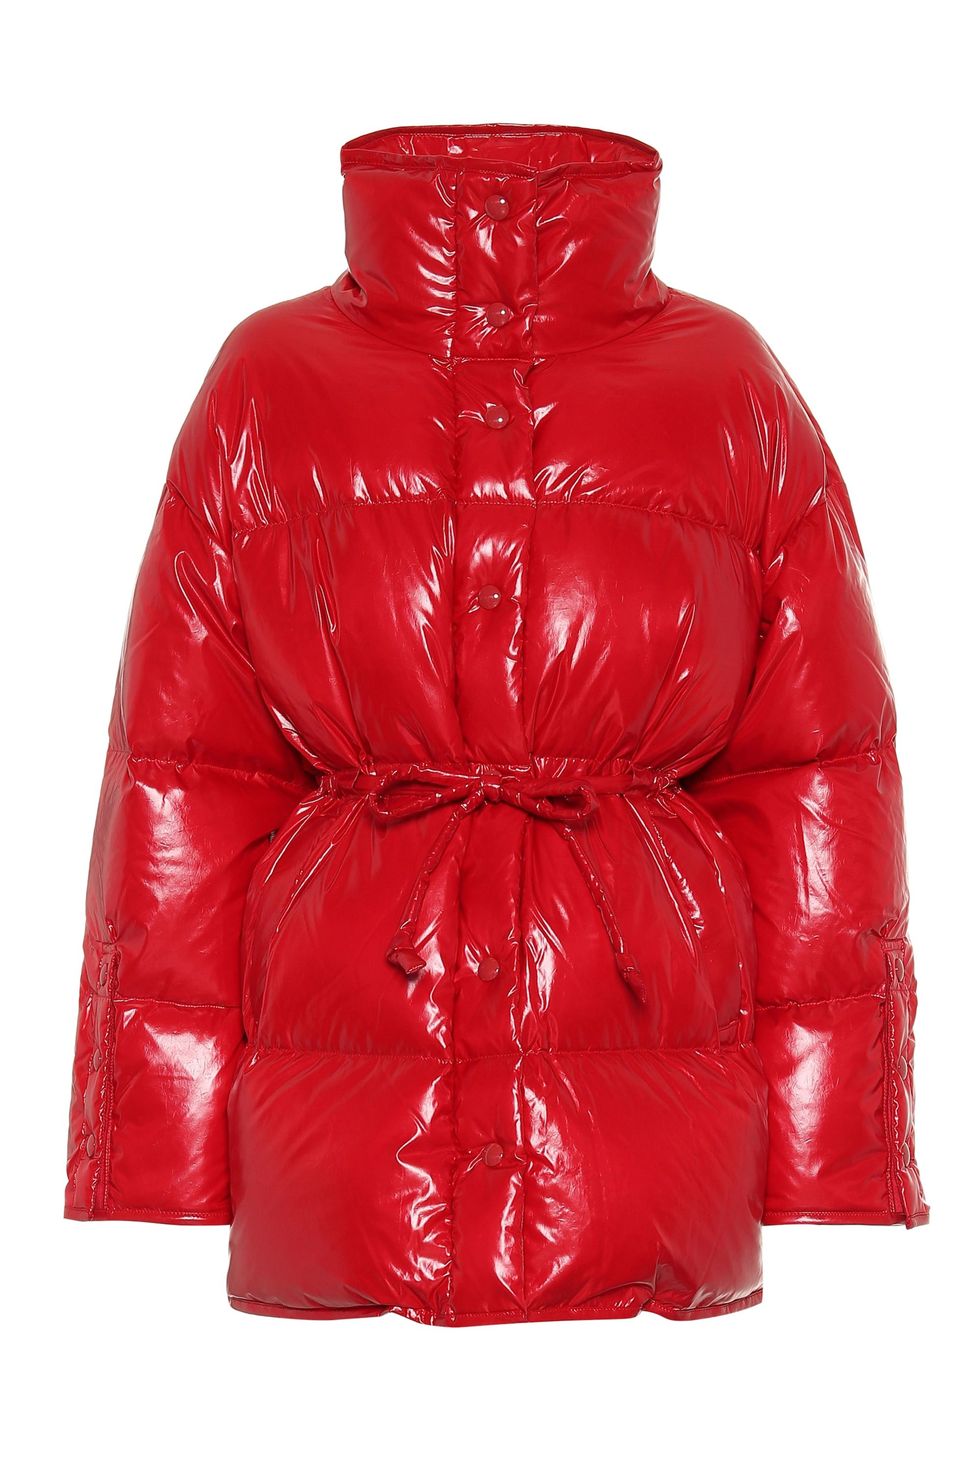 Well lit fashion portrait in a cold snowy day of a woman wearing a metallic  inflatable oversized bubble puffer jacket designed by moncler and  balenciaga, in desert sharp focus, clear, intricate, cinematic